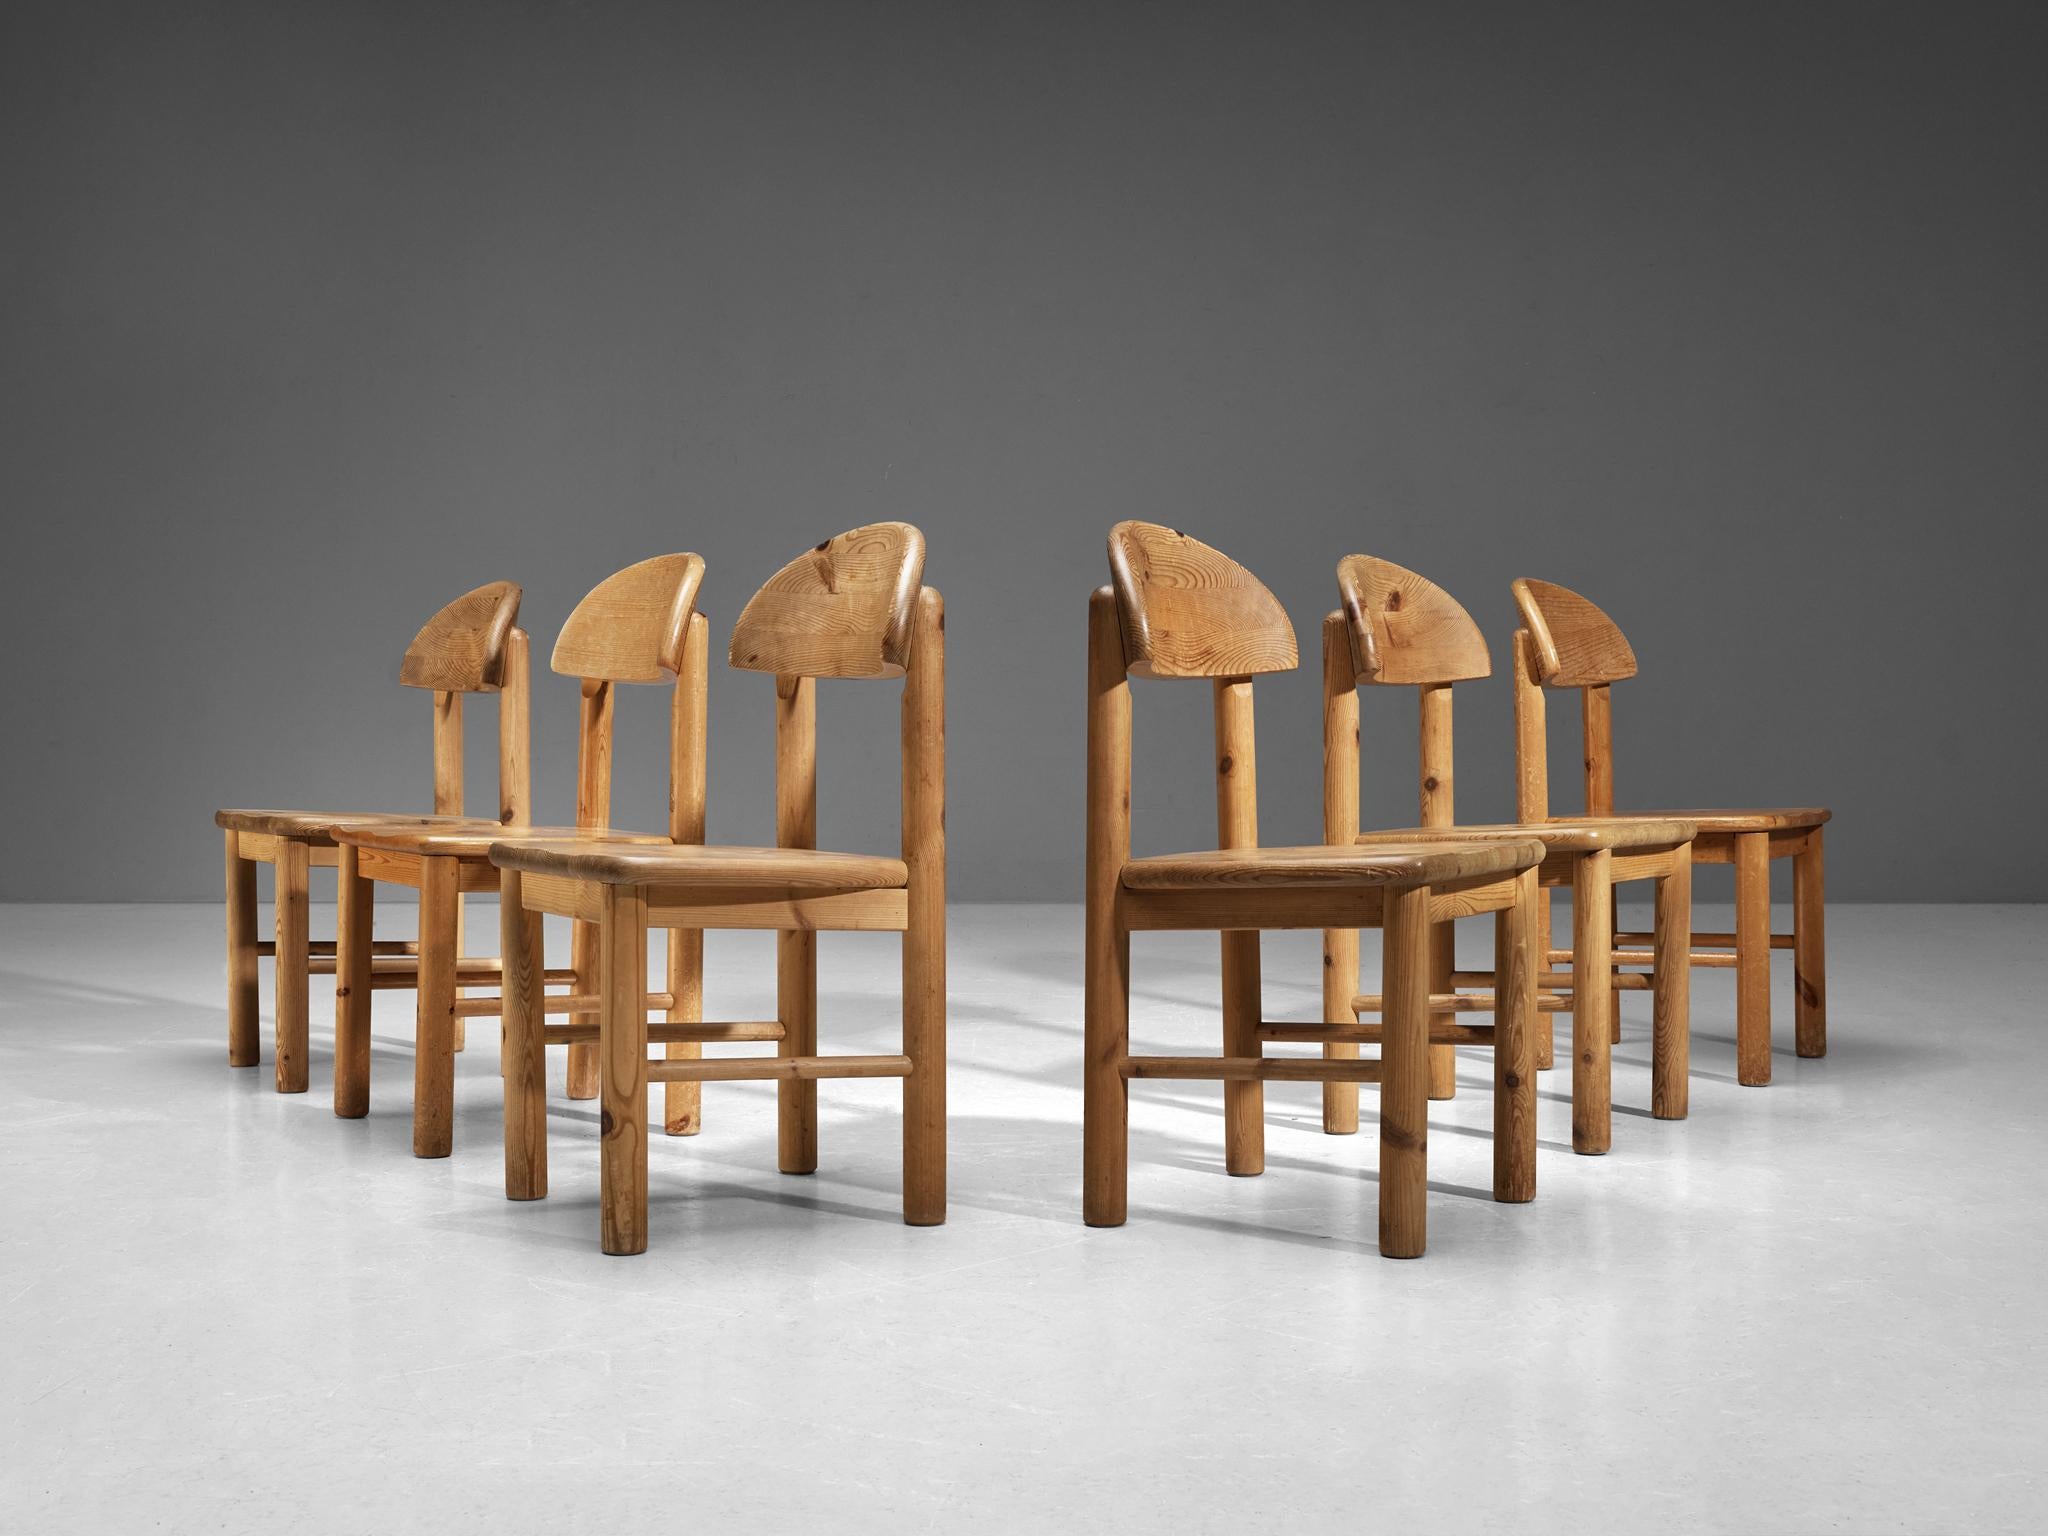 Set of ten dining chairs, pine, Denmark 1970s. 

Beautiful, organic and natural dining chairs in solid pine. A simplistic design with a round seating and attention for the natural expression and grain of the wood. These chairs hold a beautiful